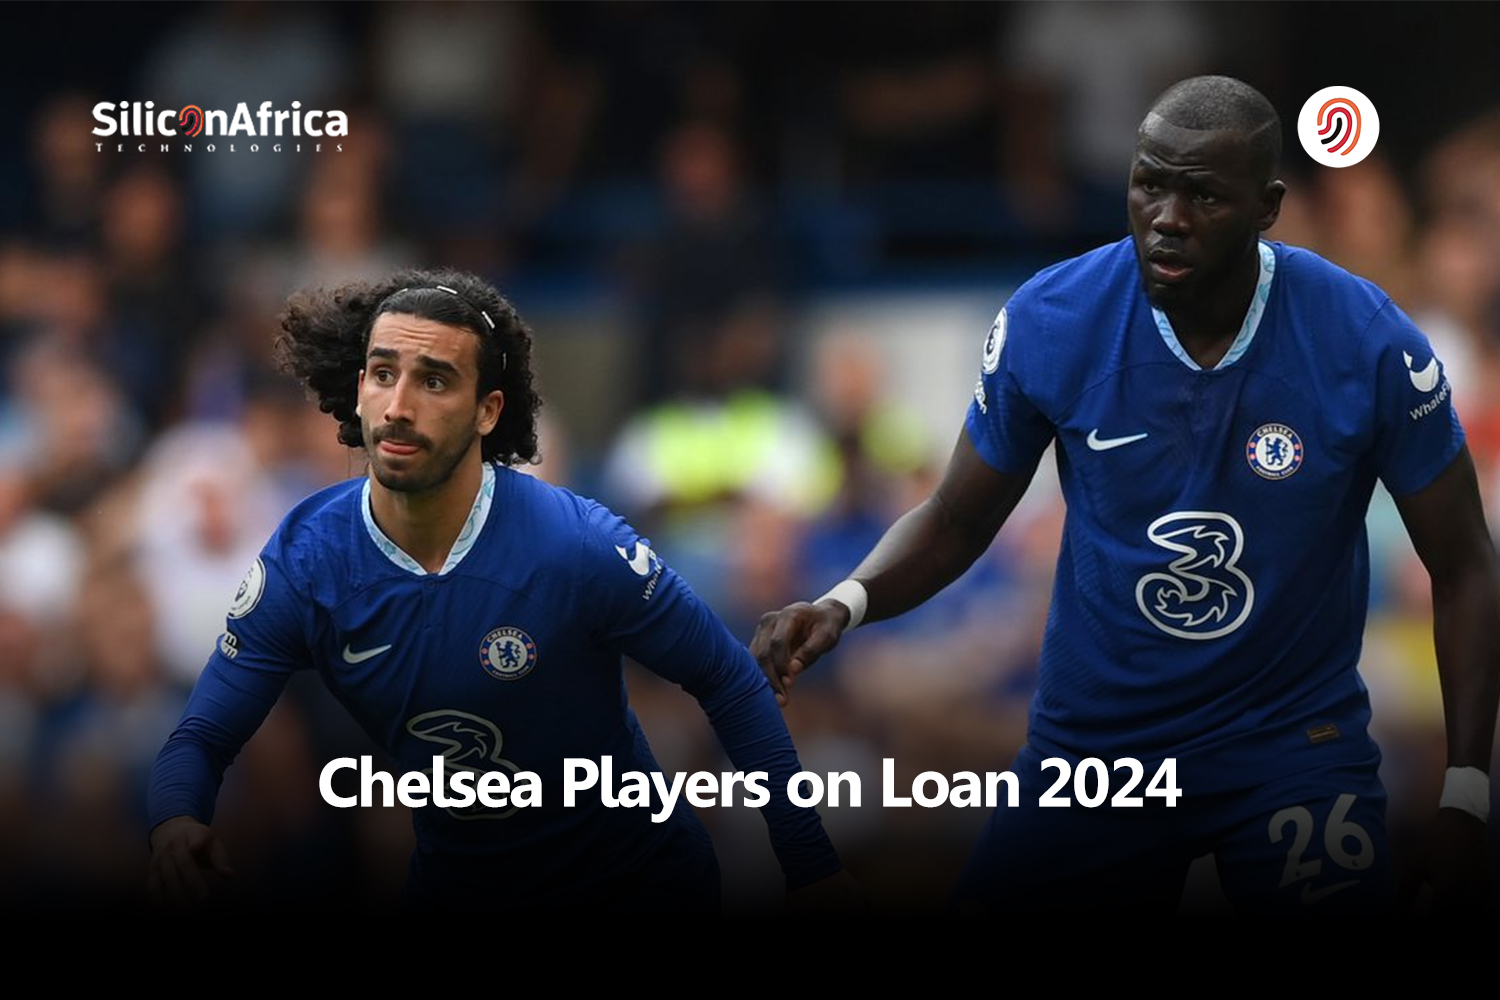 Chelsea players on loan